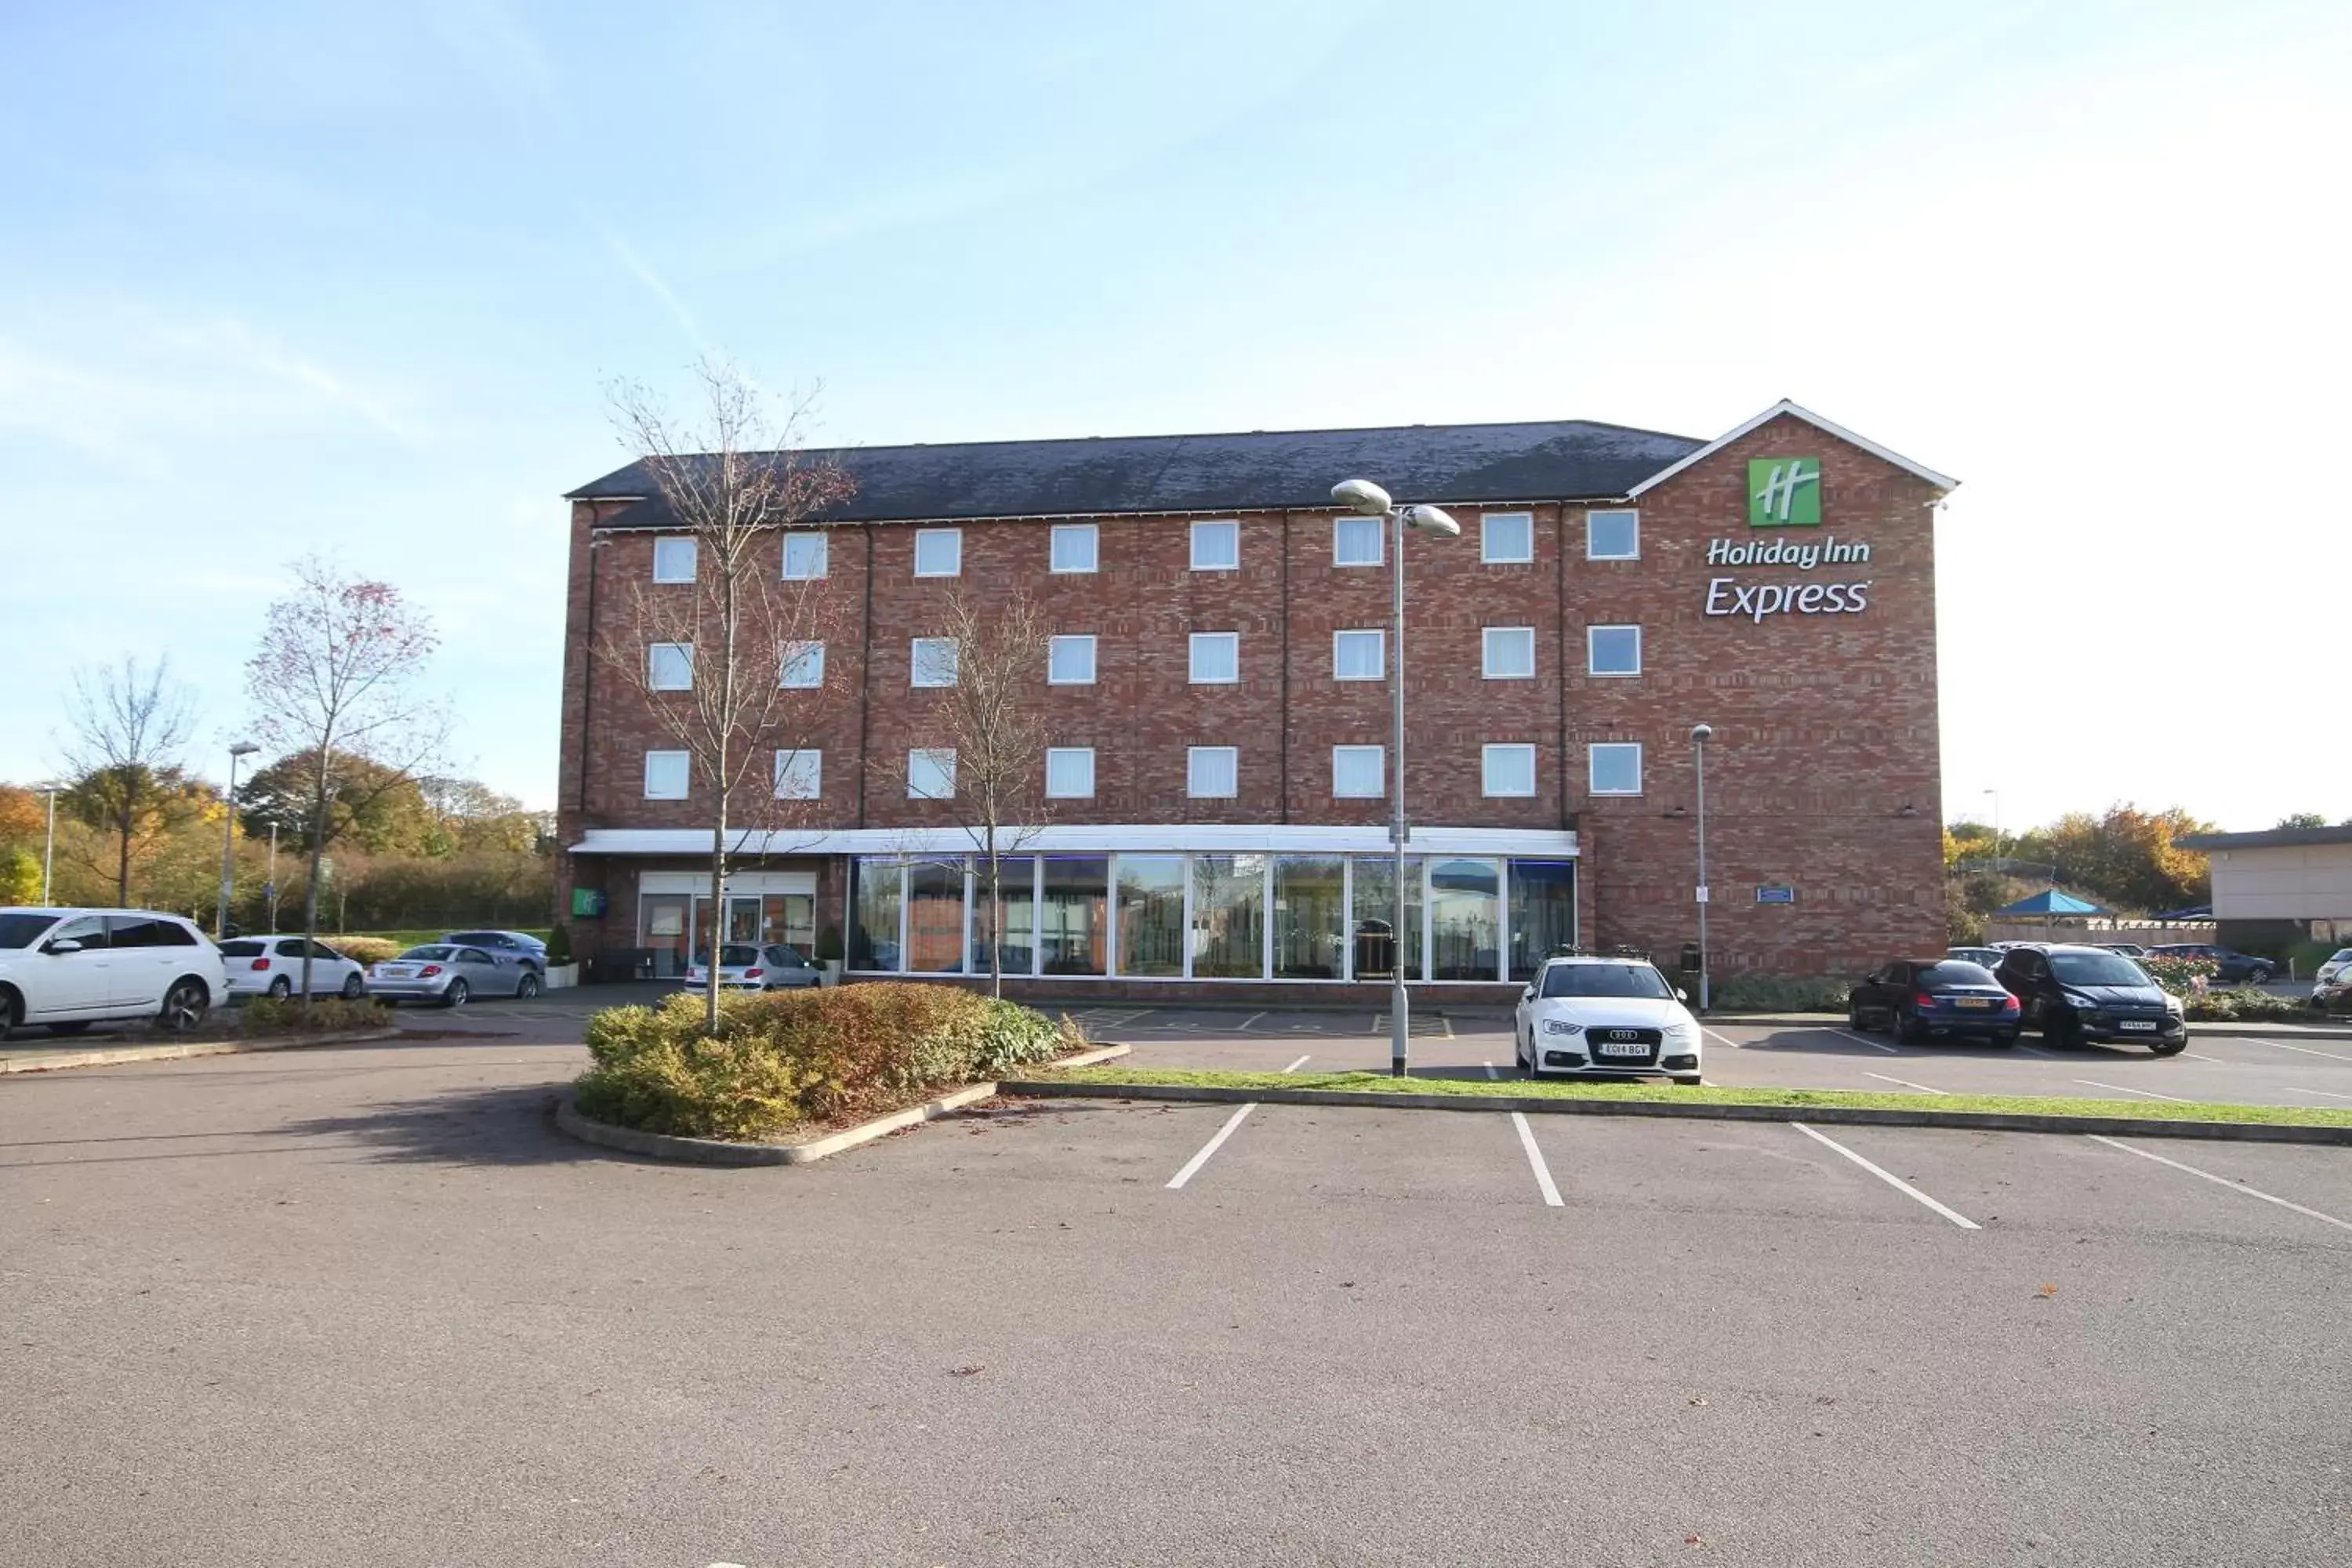 Property Building in Holiday Inn Express Nuneaton, an IHG Hotel